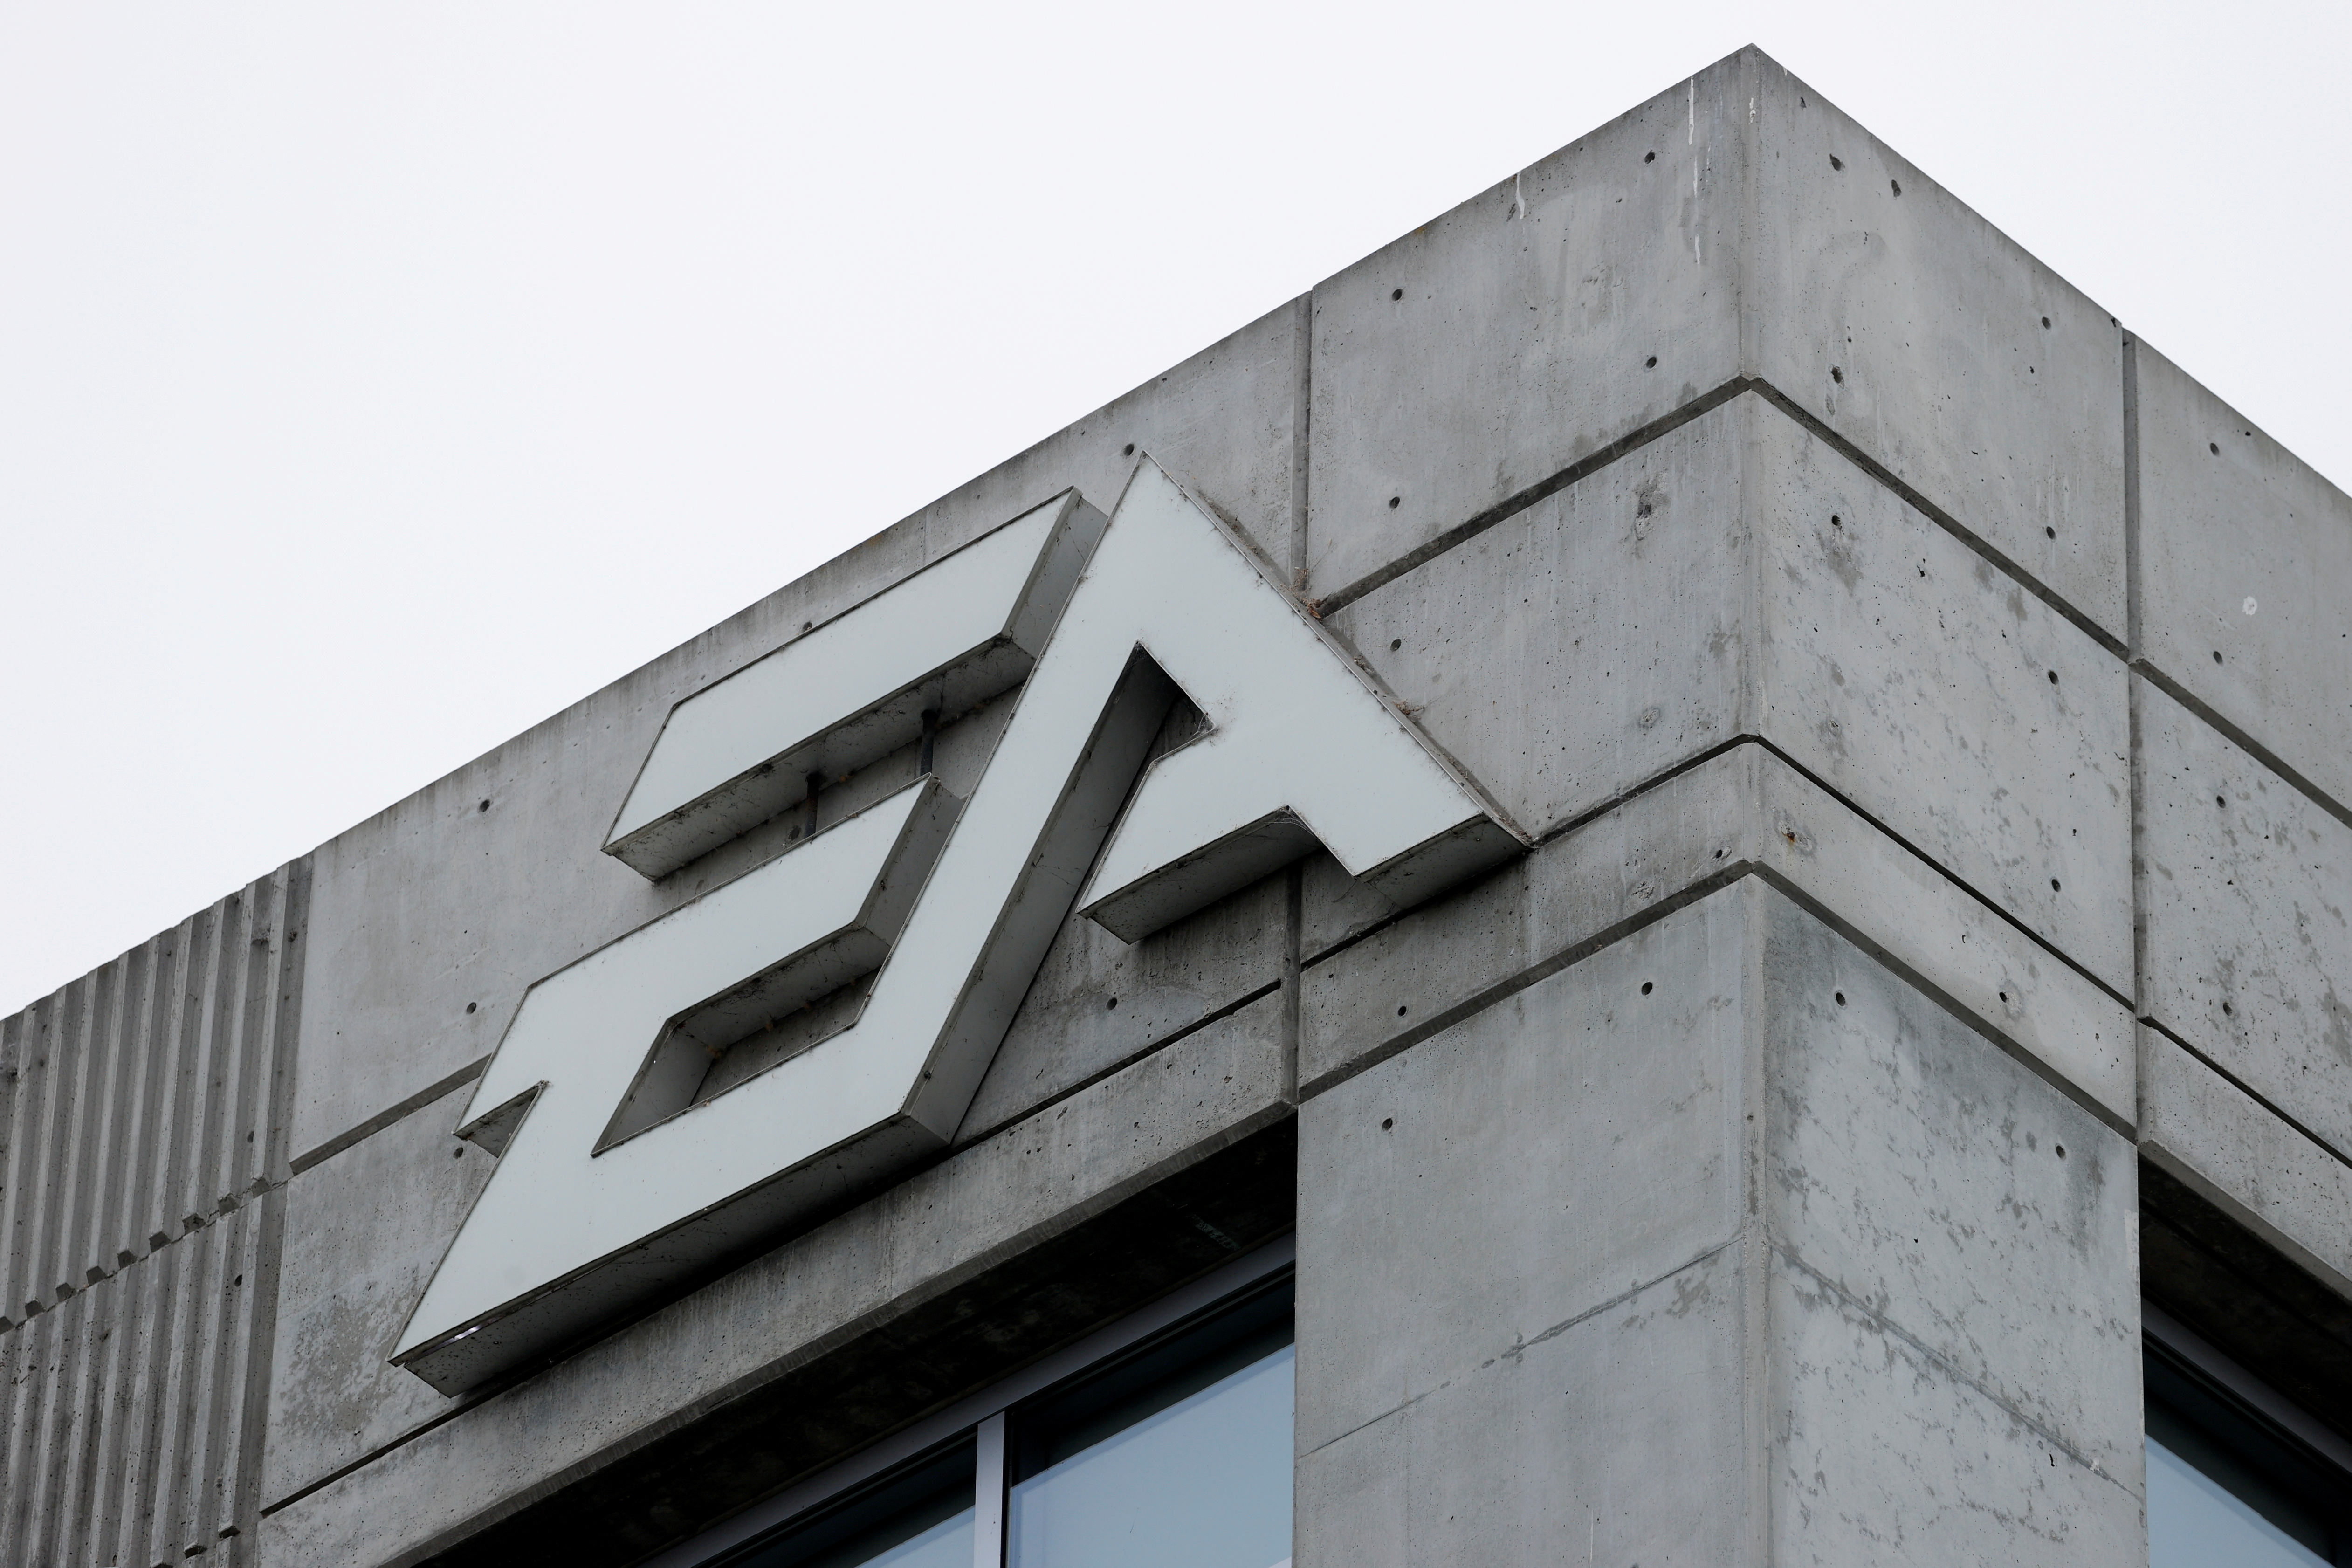 An Electronic Arts office building is shown in Los Angeles, California